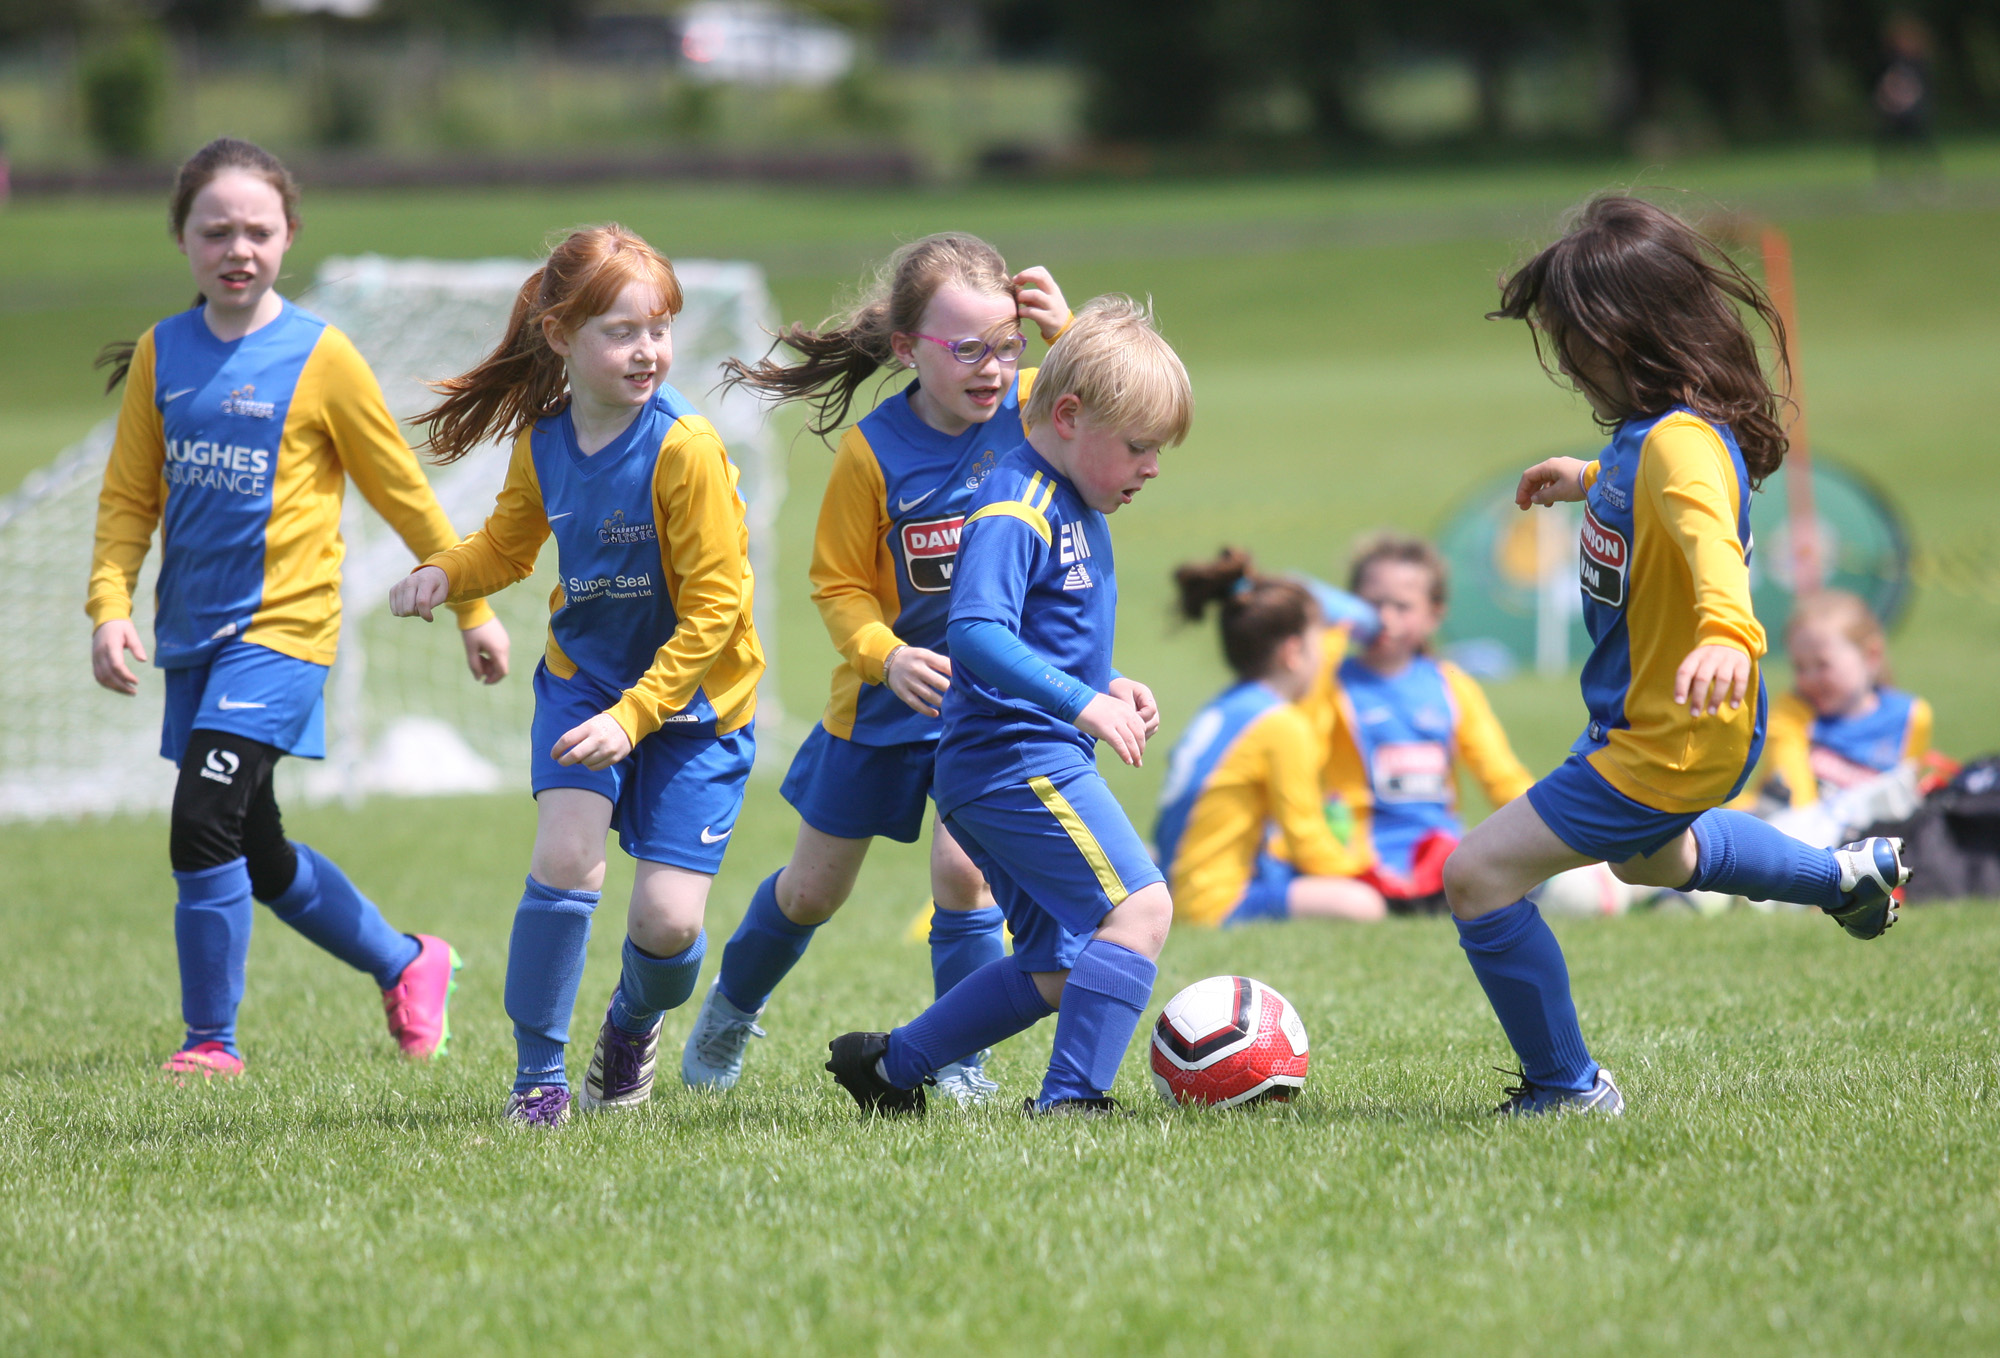 Action from a cross community football tournament organised by Carryduff Colts at Loughmoss Park 